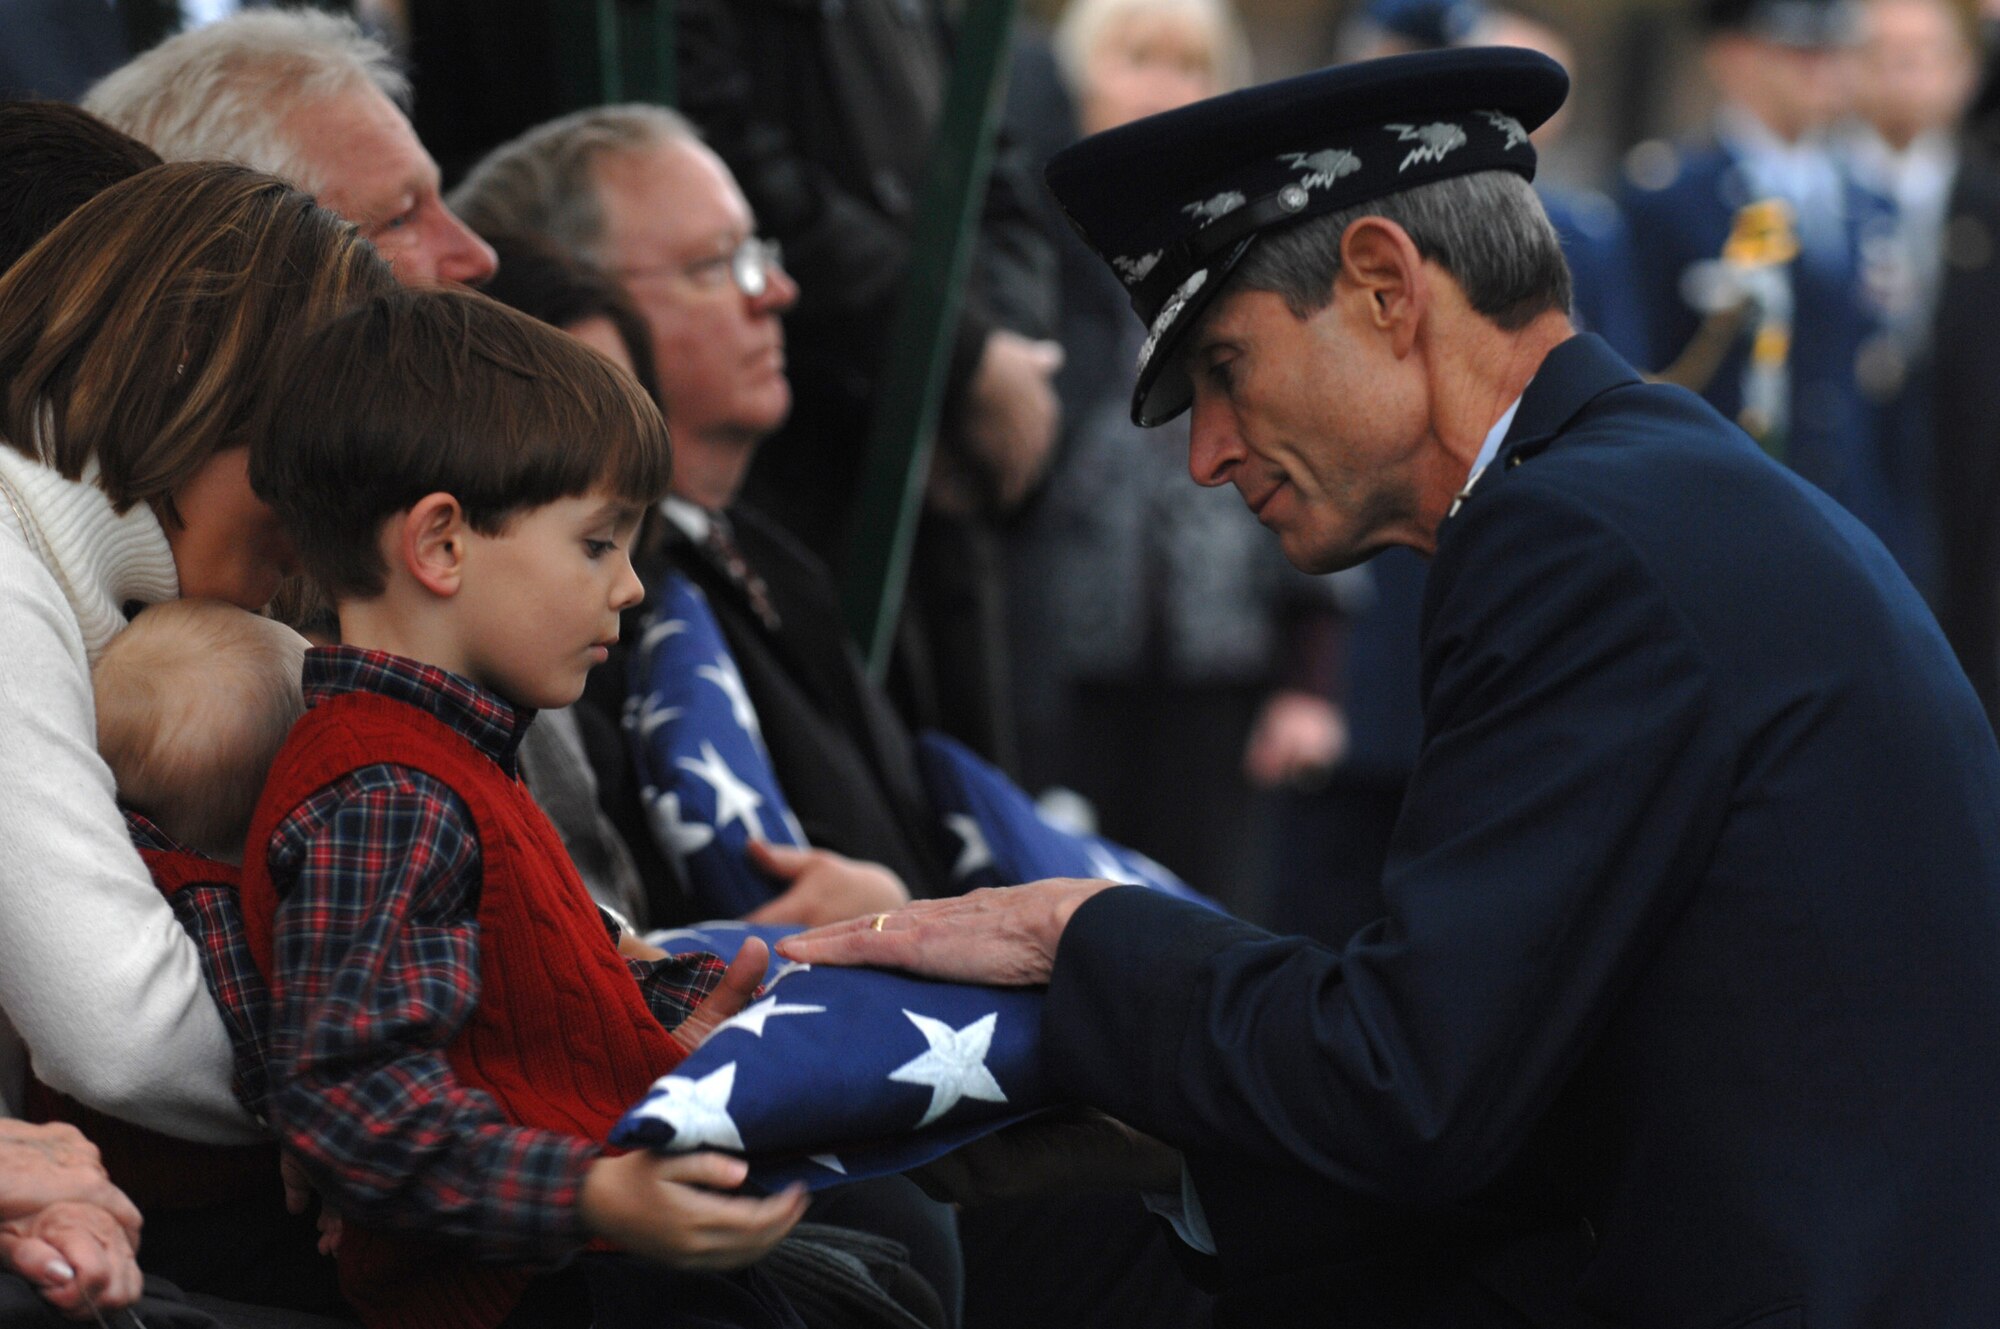 Gen. Norton Schwartz hands a folded American flag to one of the family members of the fallen B-52 Stratofortress crewmembers Nov. 14 at Arlington National Cemetery in Virginia. A group burial took place for six crewmembers of a B-52 that crashed off Guam's Northwest coast July 21. General Schwartz is the Air Force chief of staff. (U.S. Air Force photo/Staff Sgt. Catherine Thompson) 
